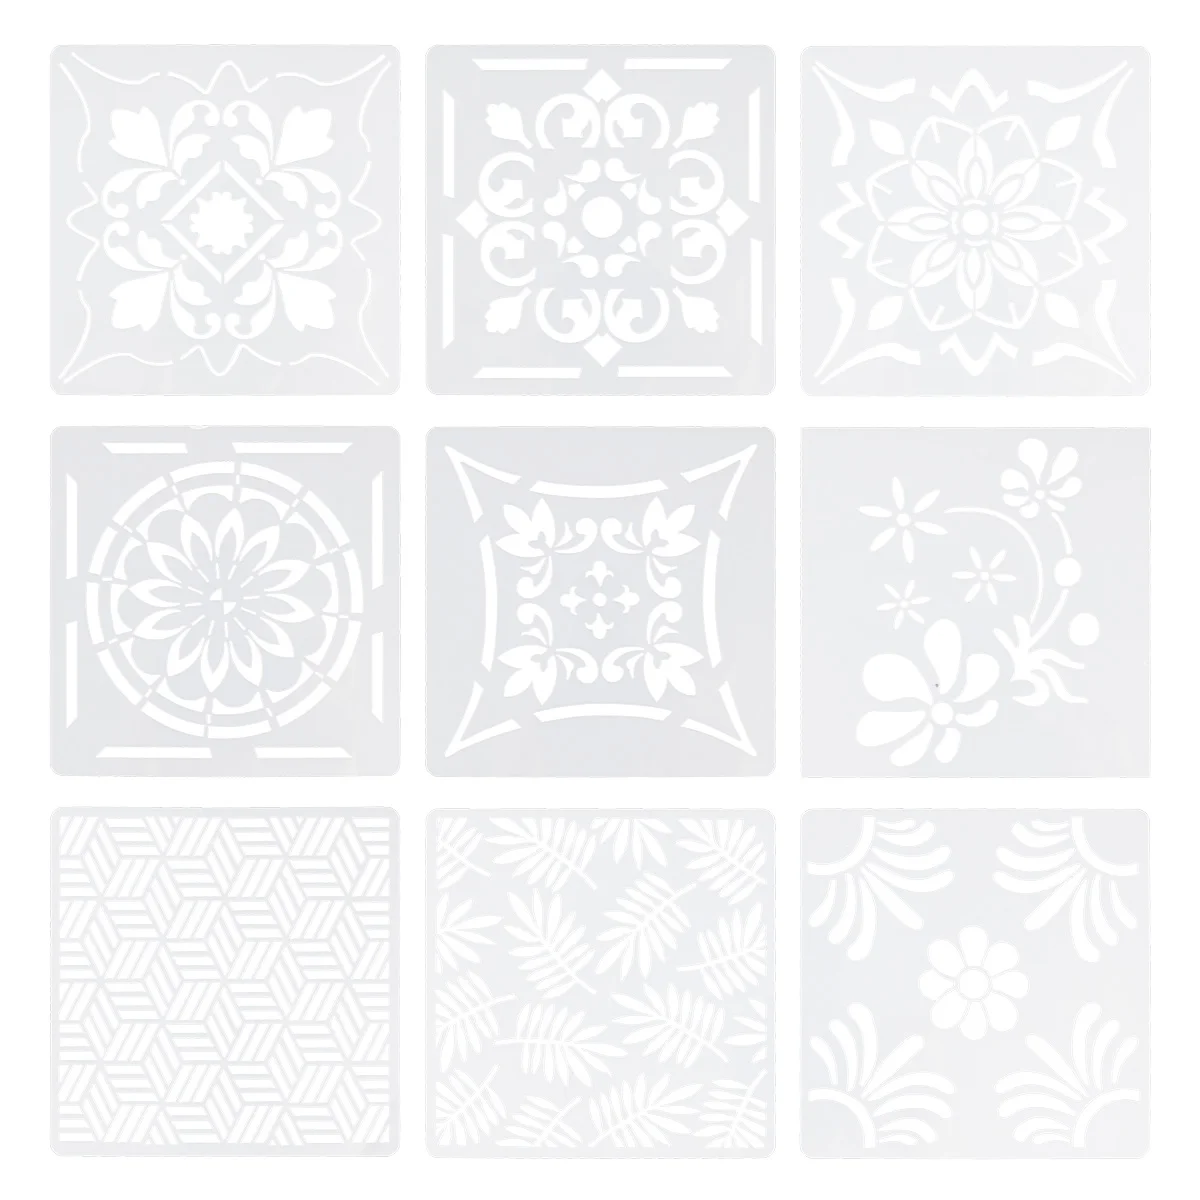 Painting Template Stencil Drawing Stencils Set Hollow Vintage for Sturdy Craft DIY Template Applique Mold Stencil Tool 20 sheets ocean painting template small stencils for crafts oil square drawing mold